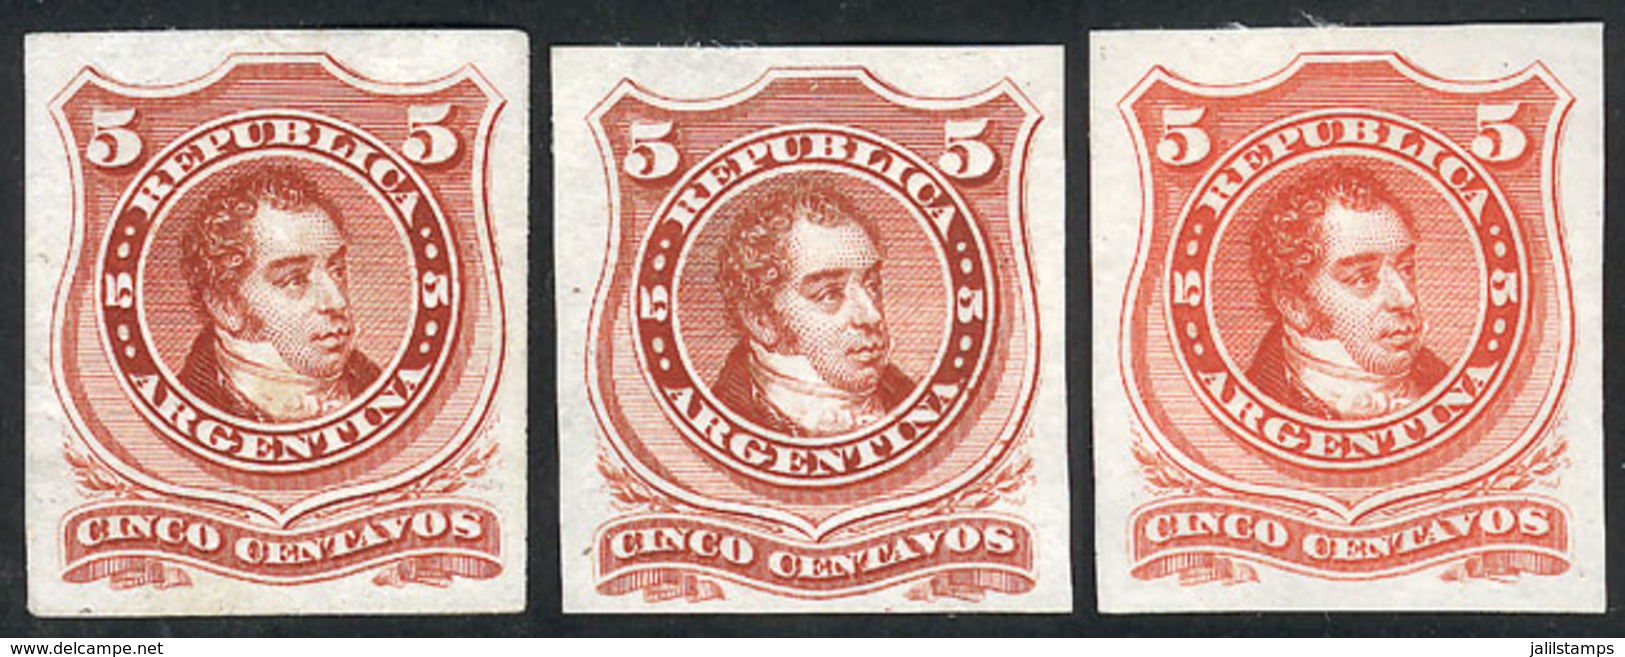 116 ARGENTINA: GJ.38, 1867 5c. Rivadavia With Groundwork Of Crossed Lines, 3 TRIAL COLOR PROOFS (different Shades) Print - Other & Unclassified